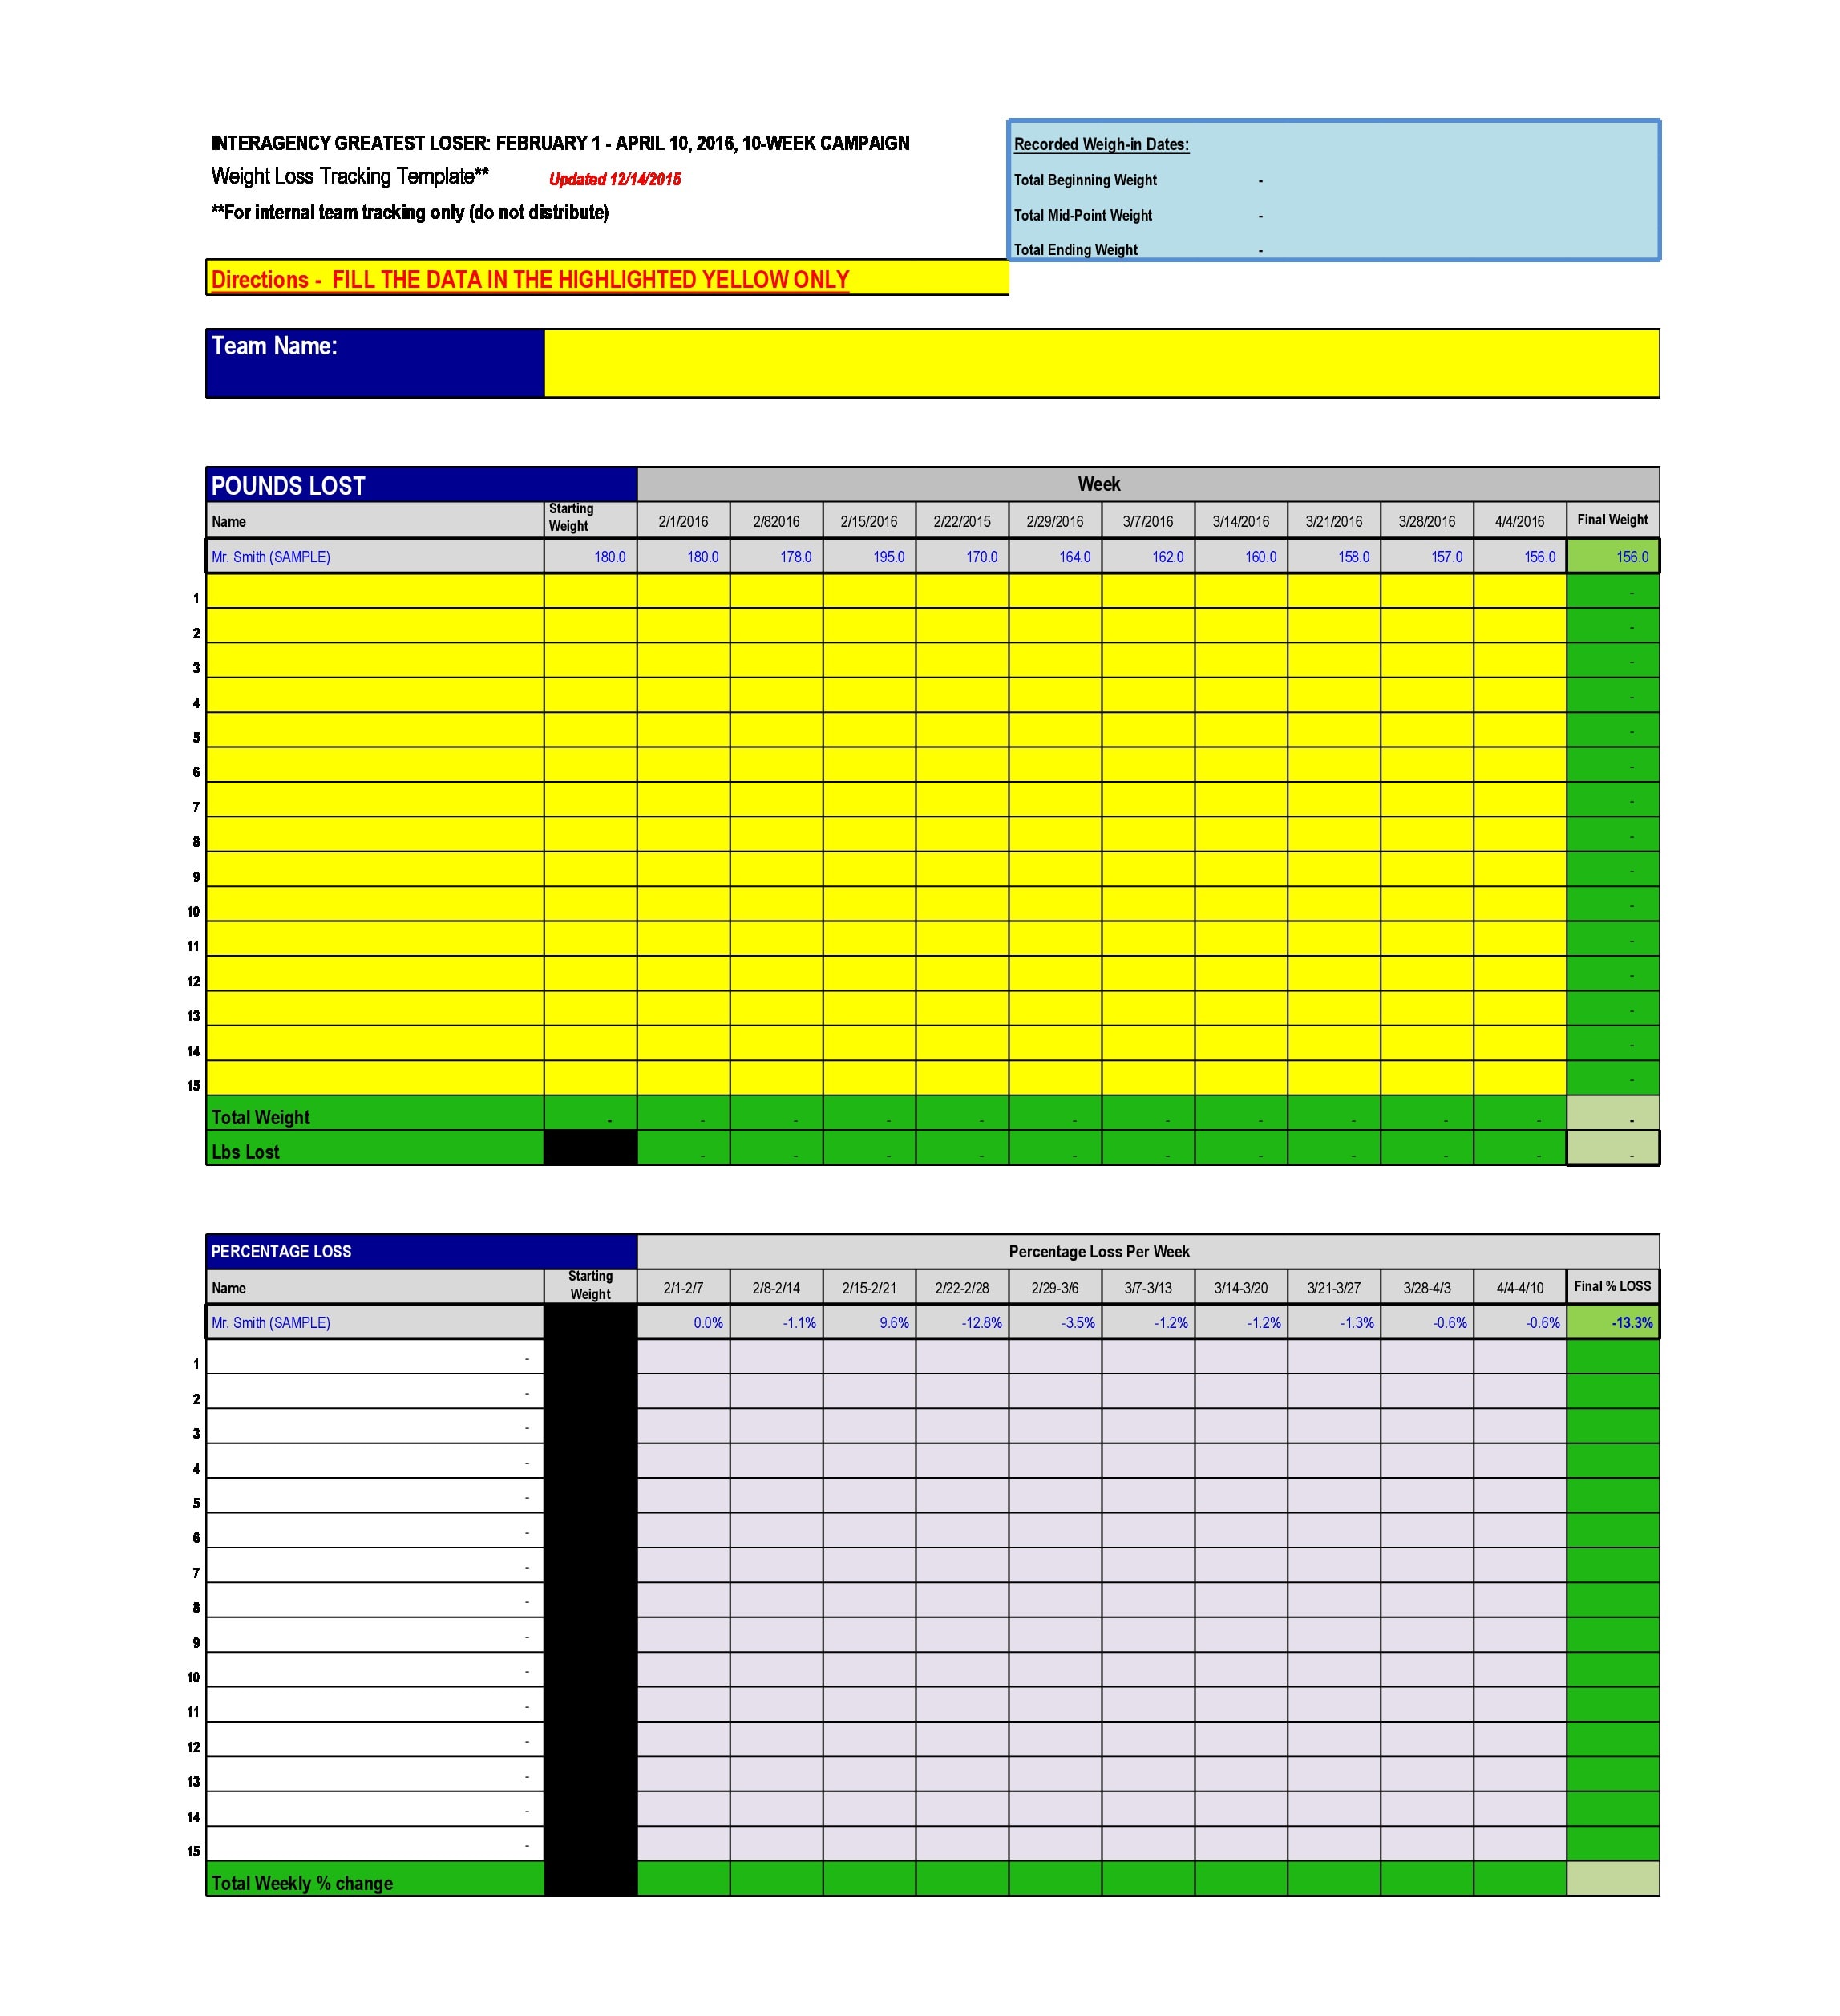 2022 Excel Weight Tracker: Compare Actual Weight to Weight Loss Goals –